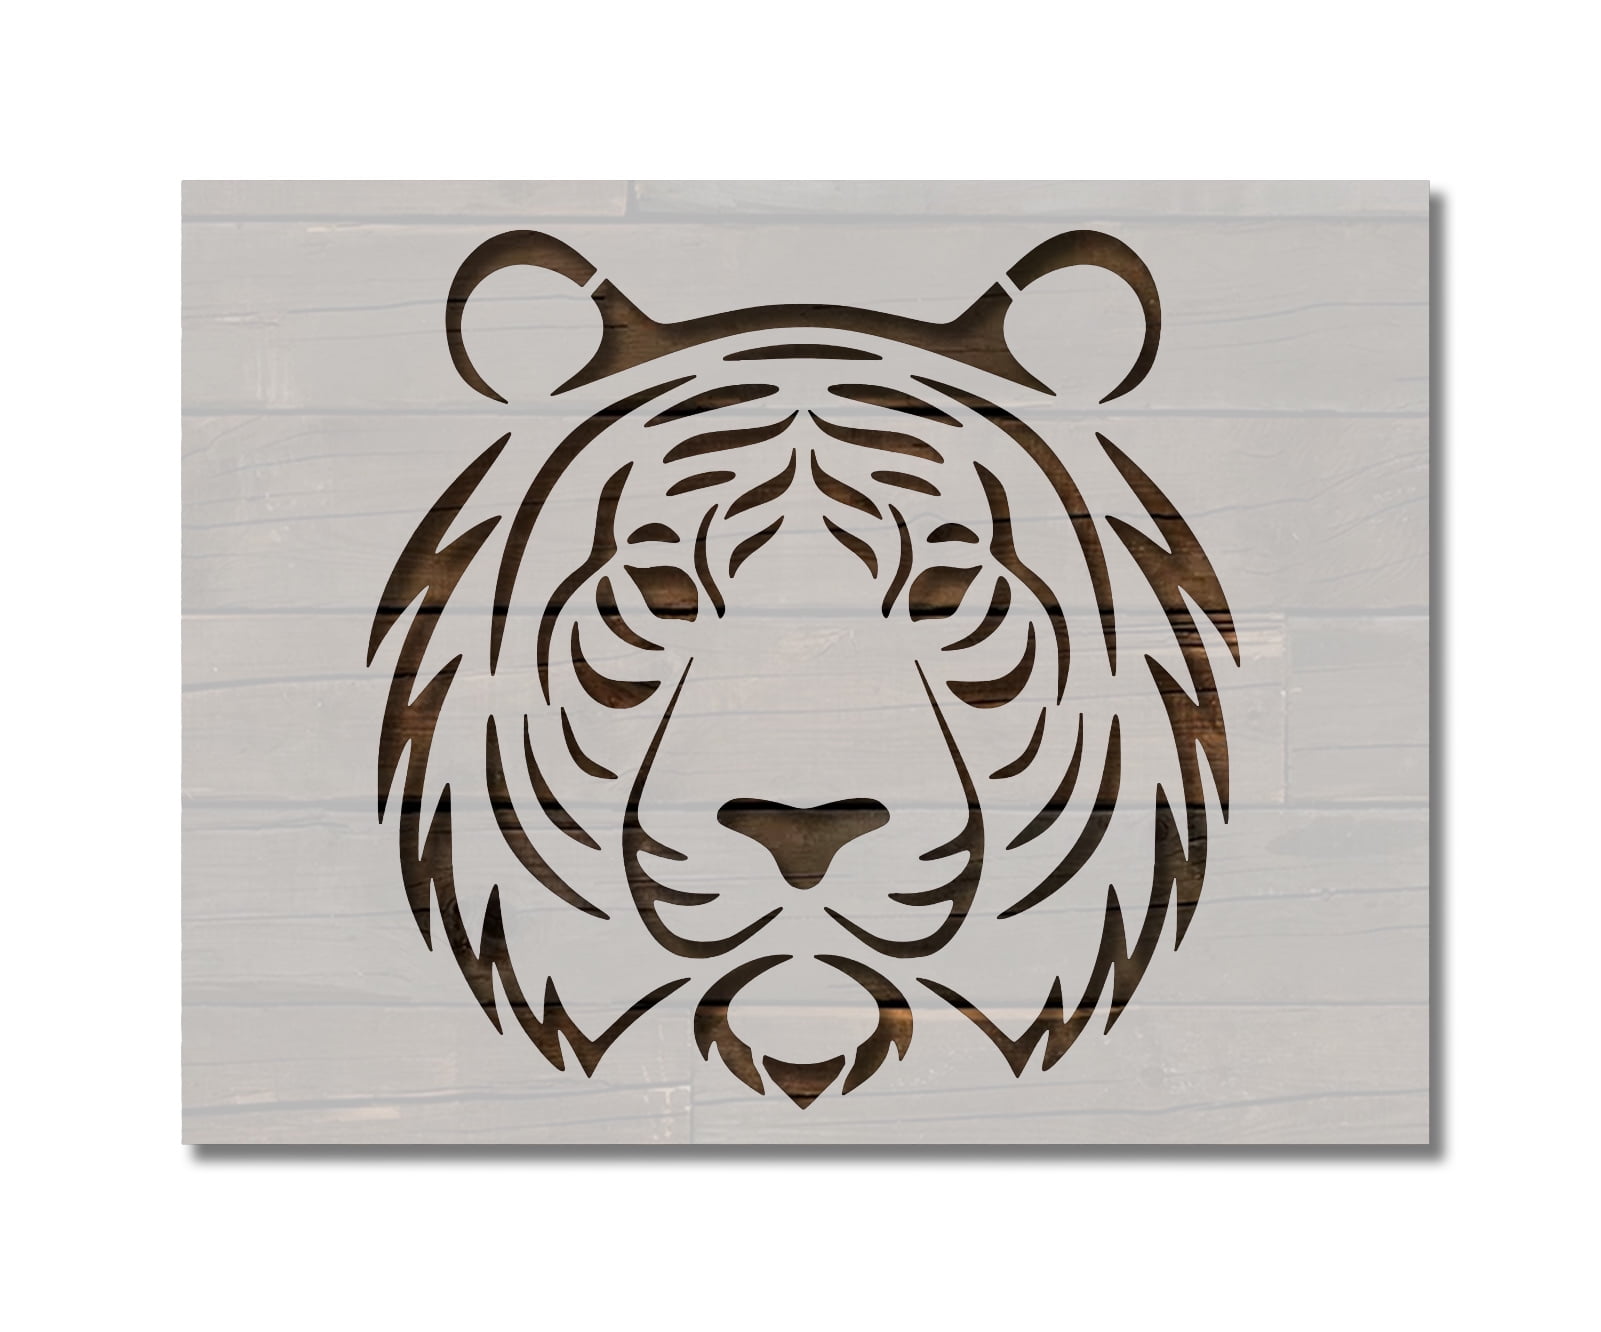 Wood Burning Stencil Tigers Stainless Steel Metal Stencils Template for  Wood Carving Drawing Engraving and Scrapbooking